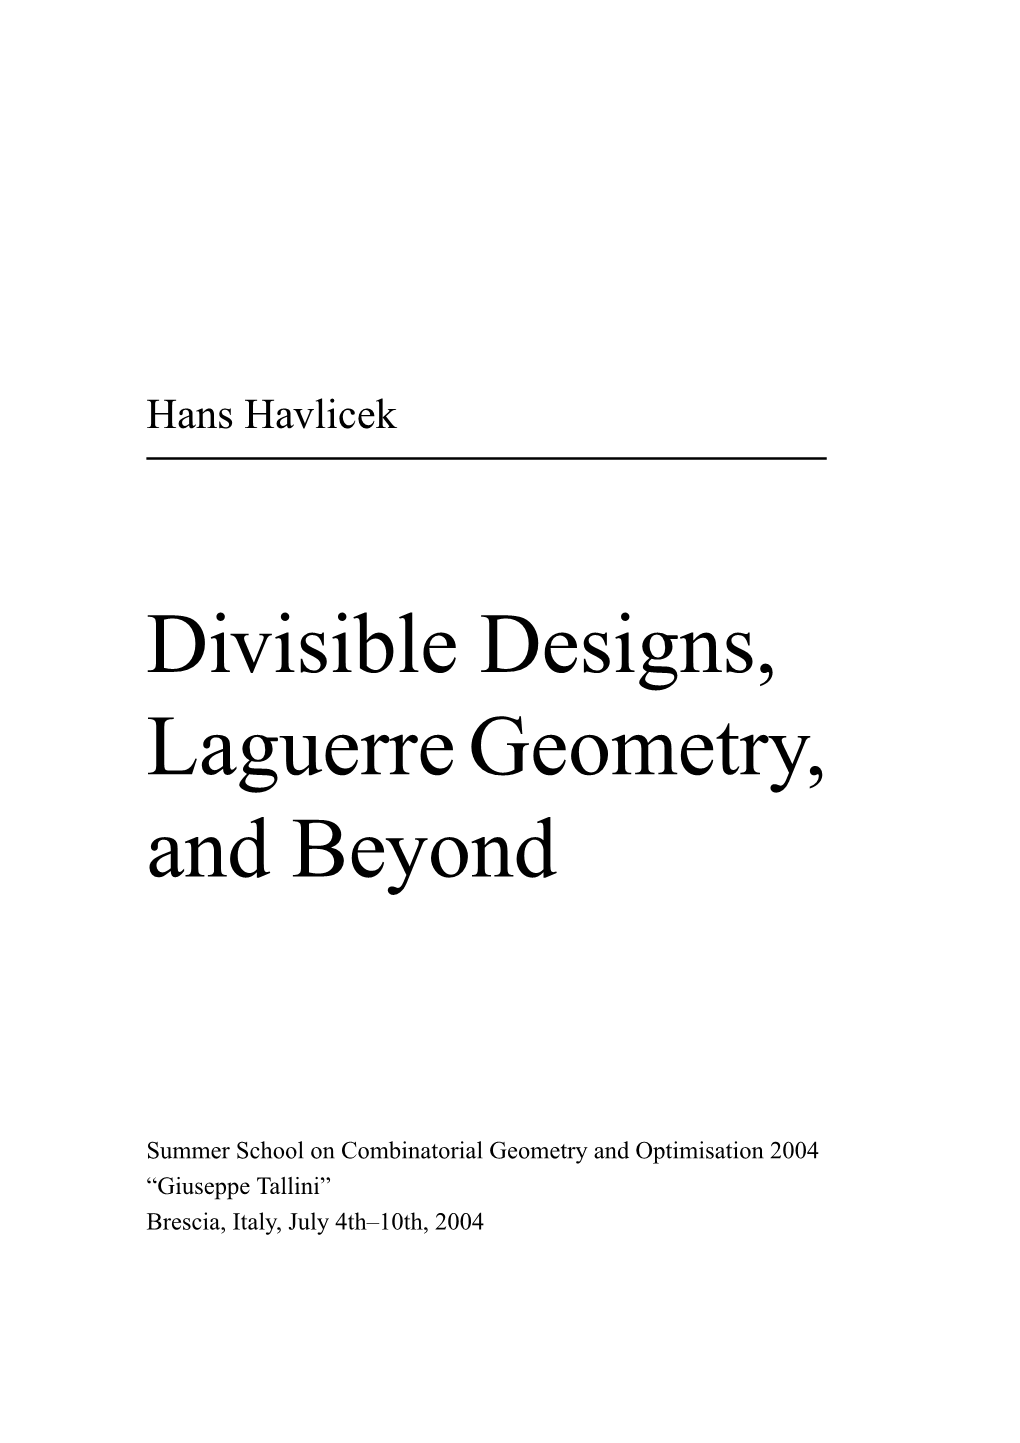 Divisible Designs, Laguerre Geometry, and Beyond